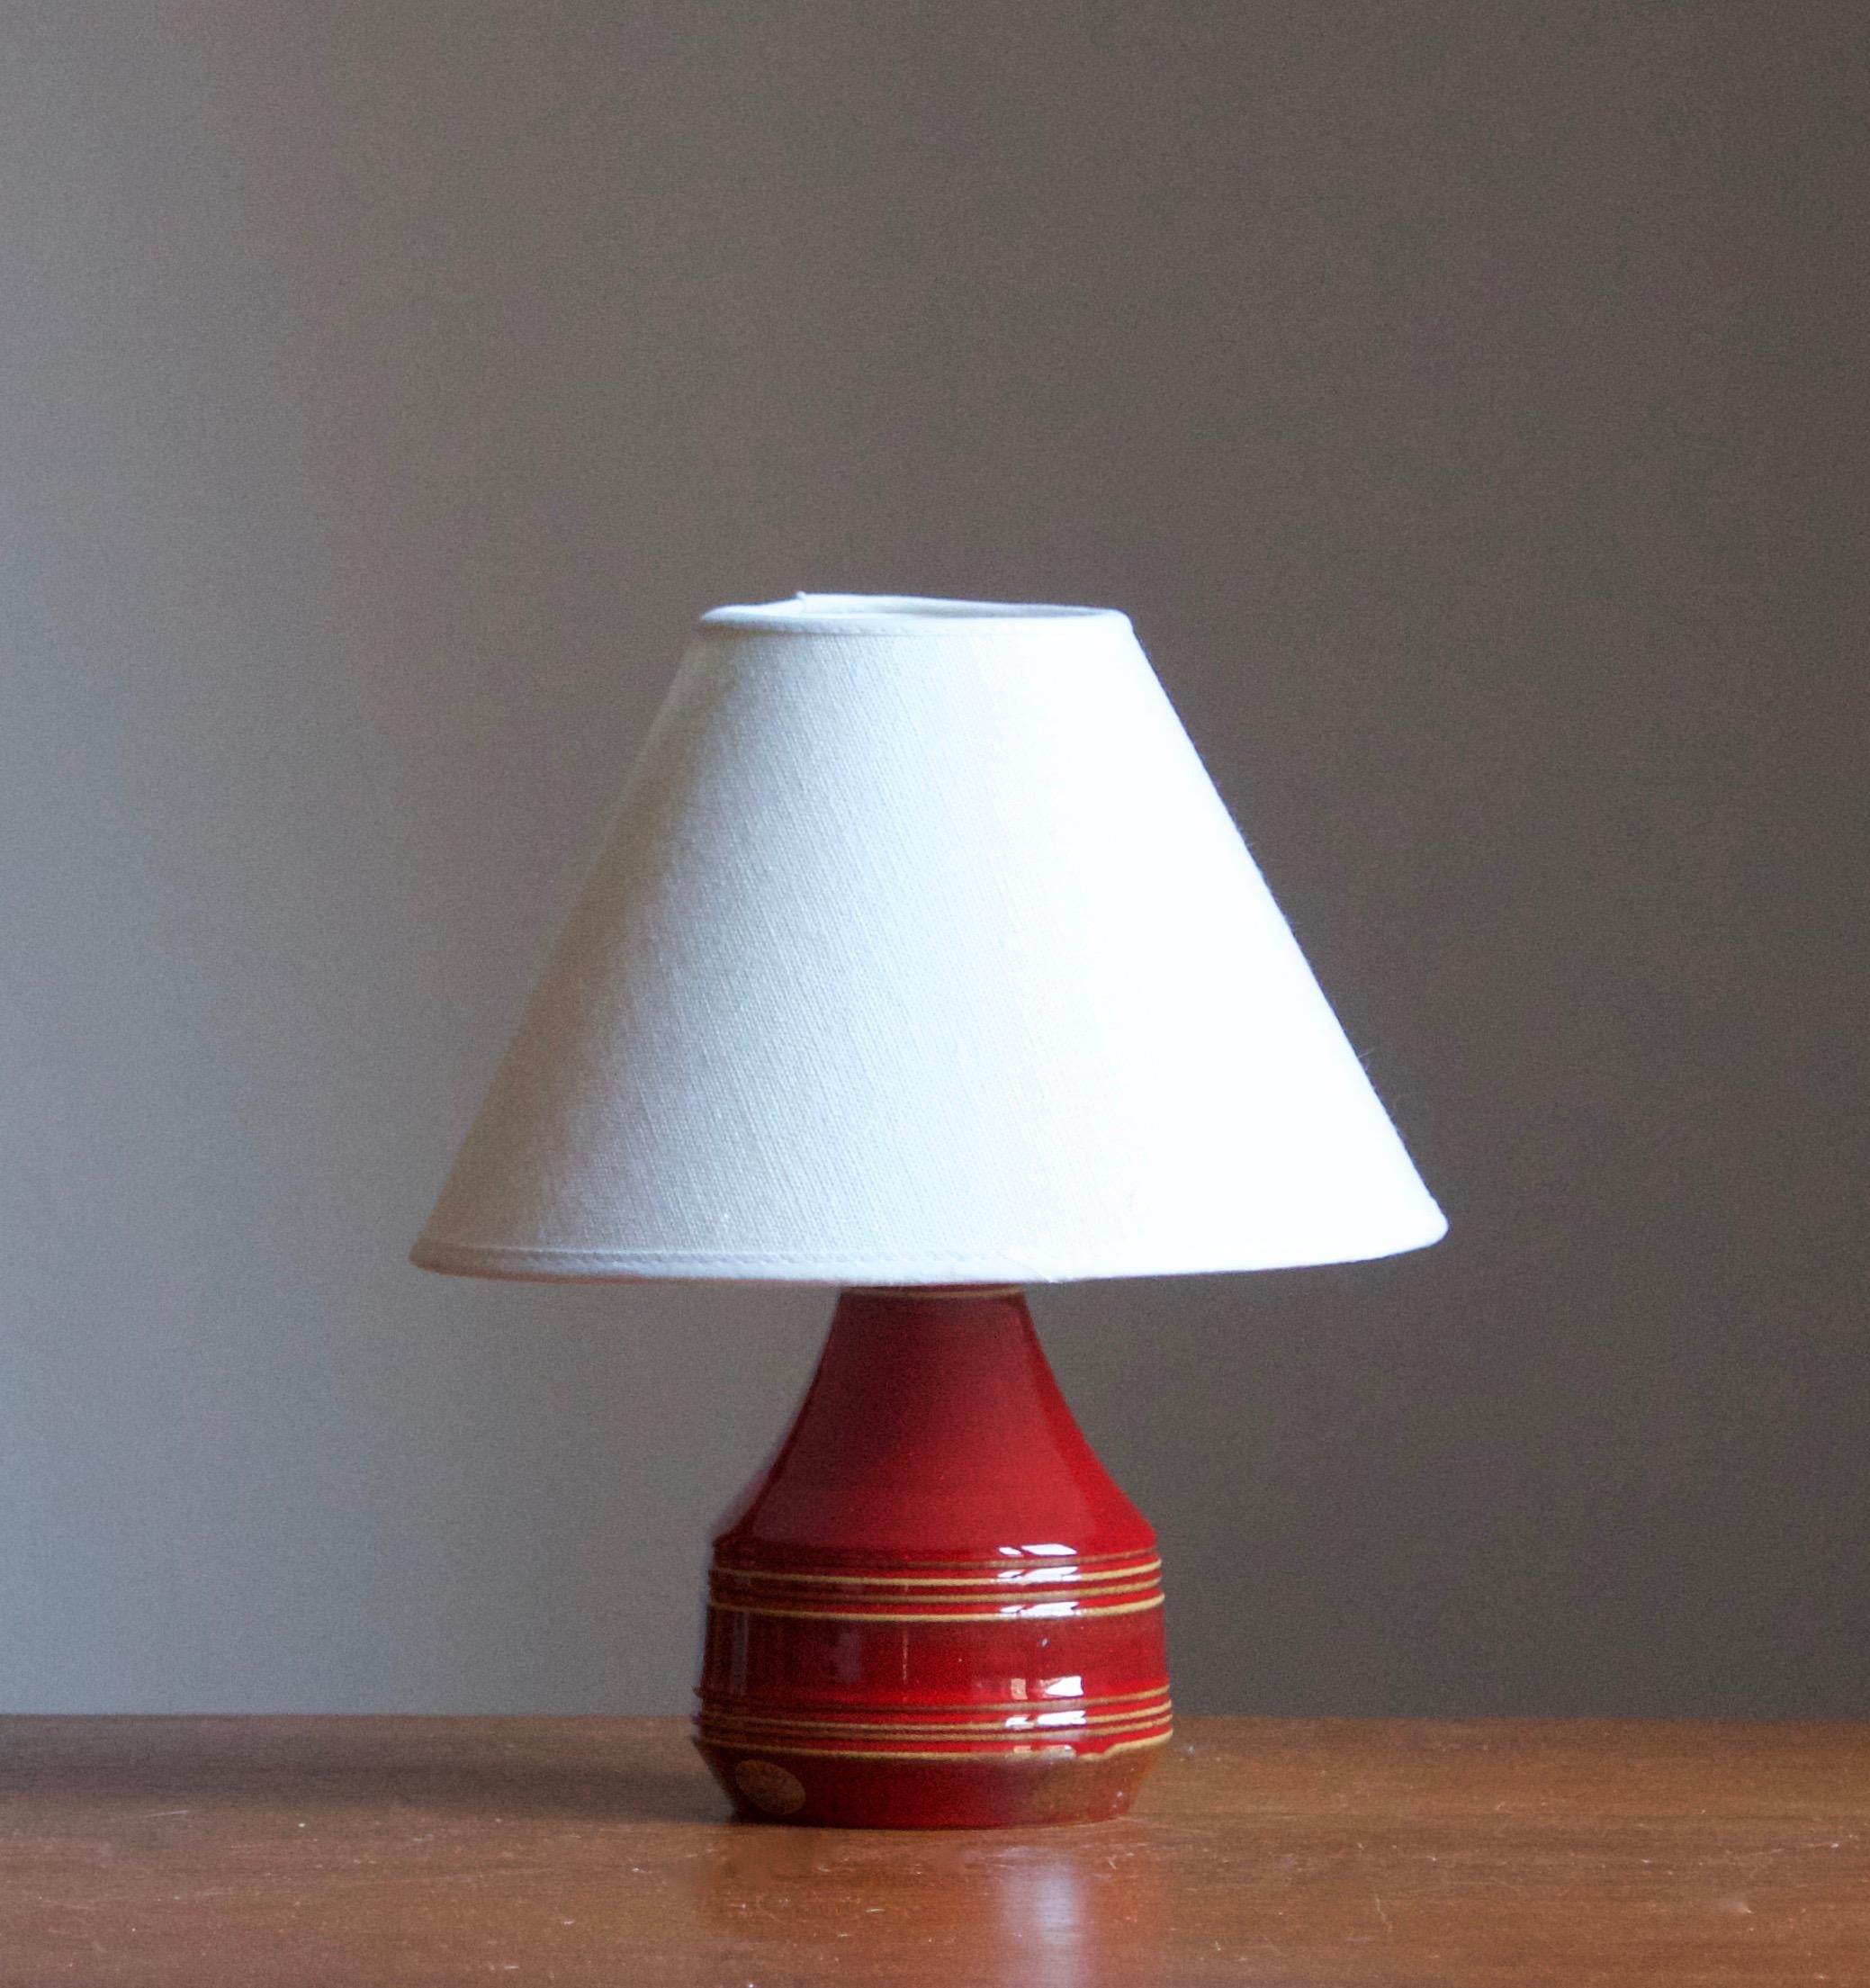 A stoneware table lamp designed by Henry Brandi, and produced by his own firm, Brandi Vejbystrand, Sweden, 1960s. Marked and labeled. 

Stated dimensions exclude lamsphade. Height includes socket. Sold without lampshade

Other lighting designers